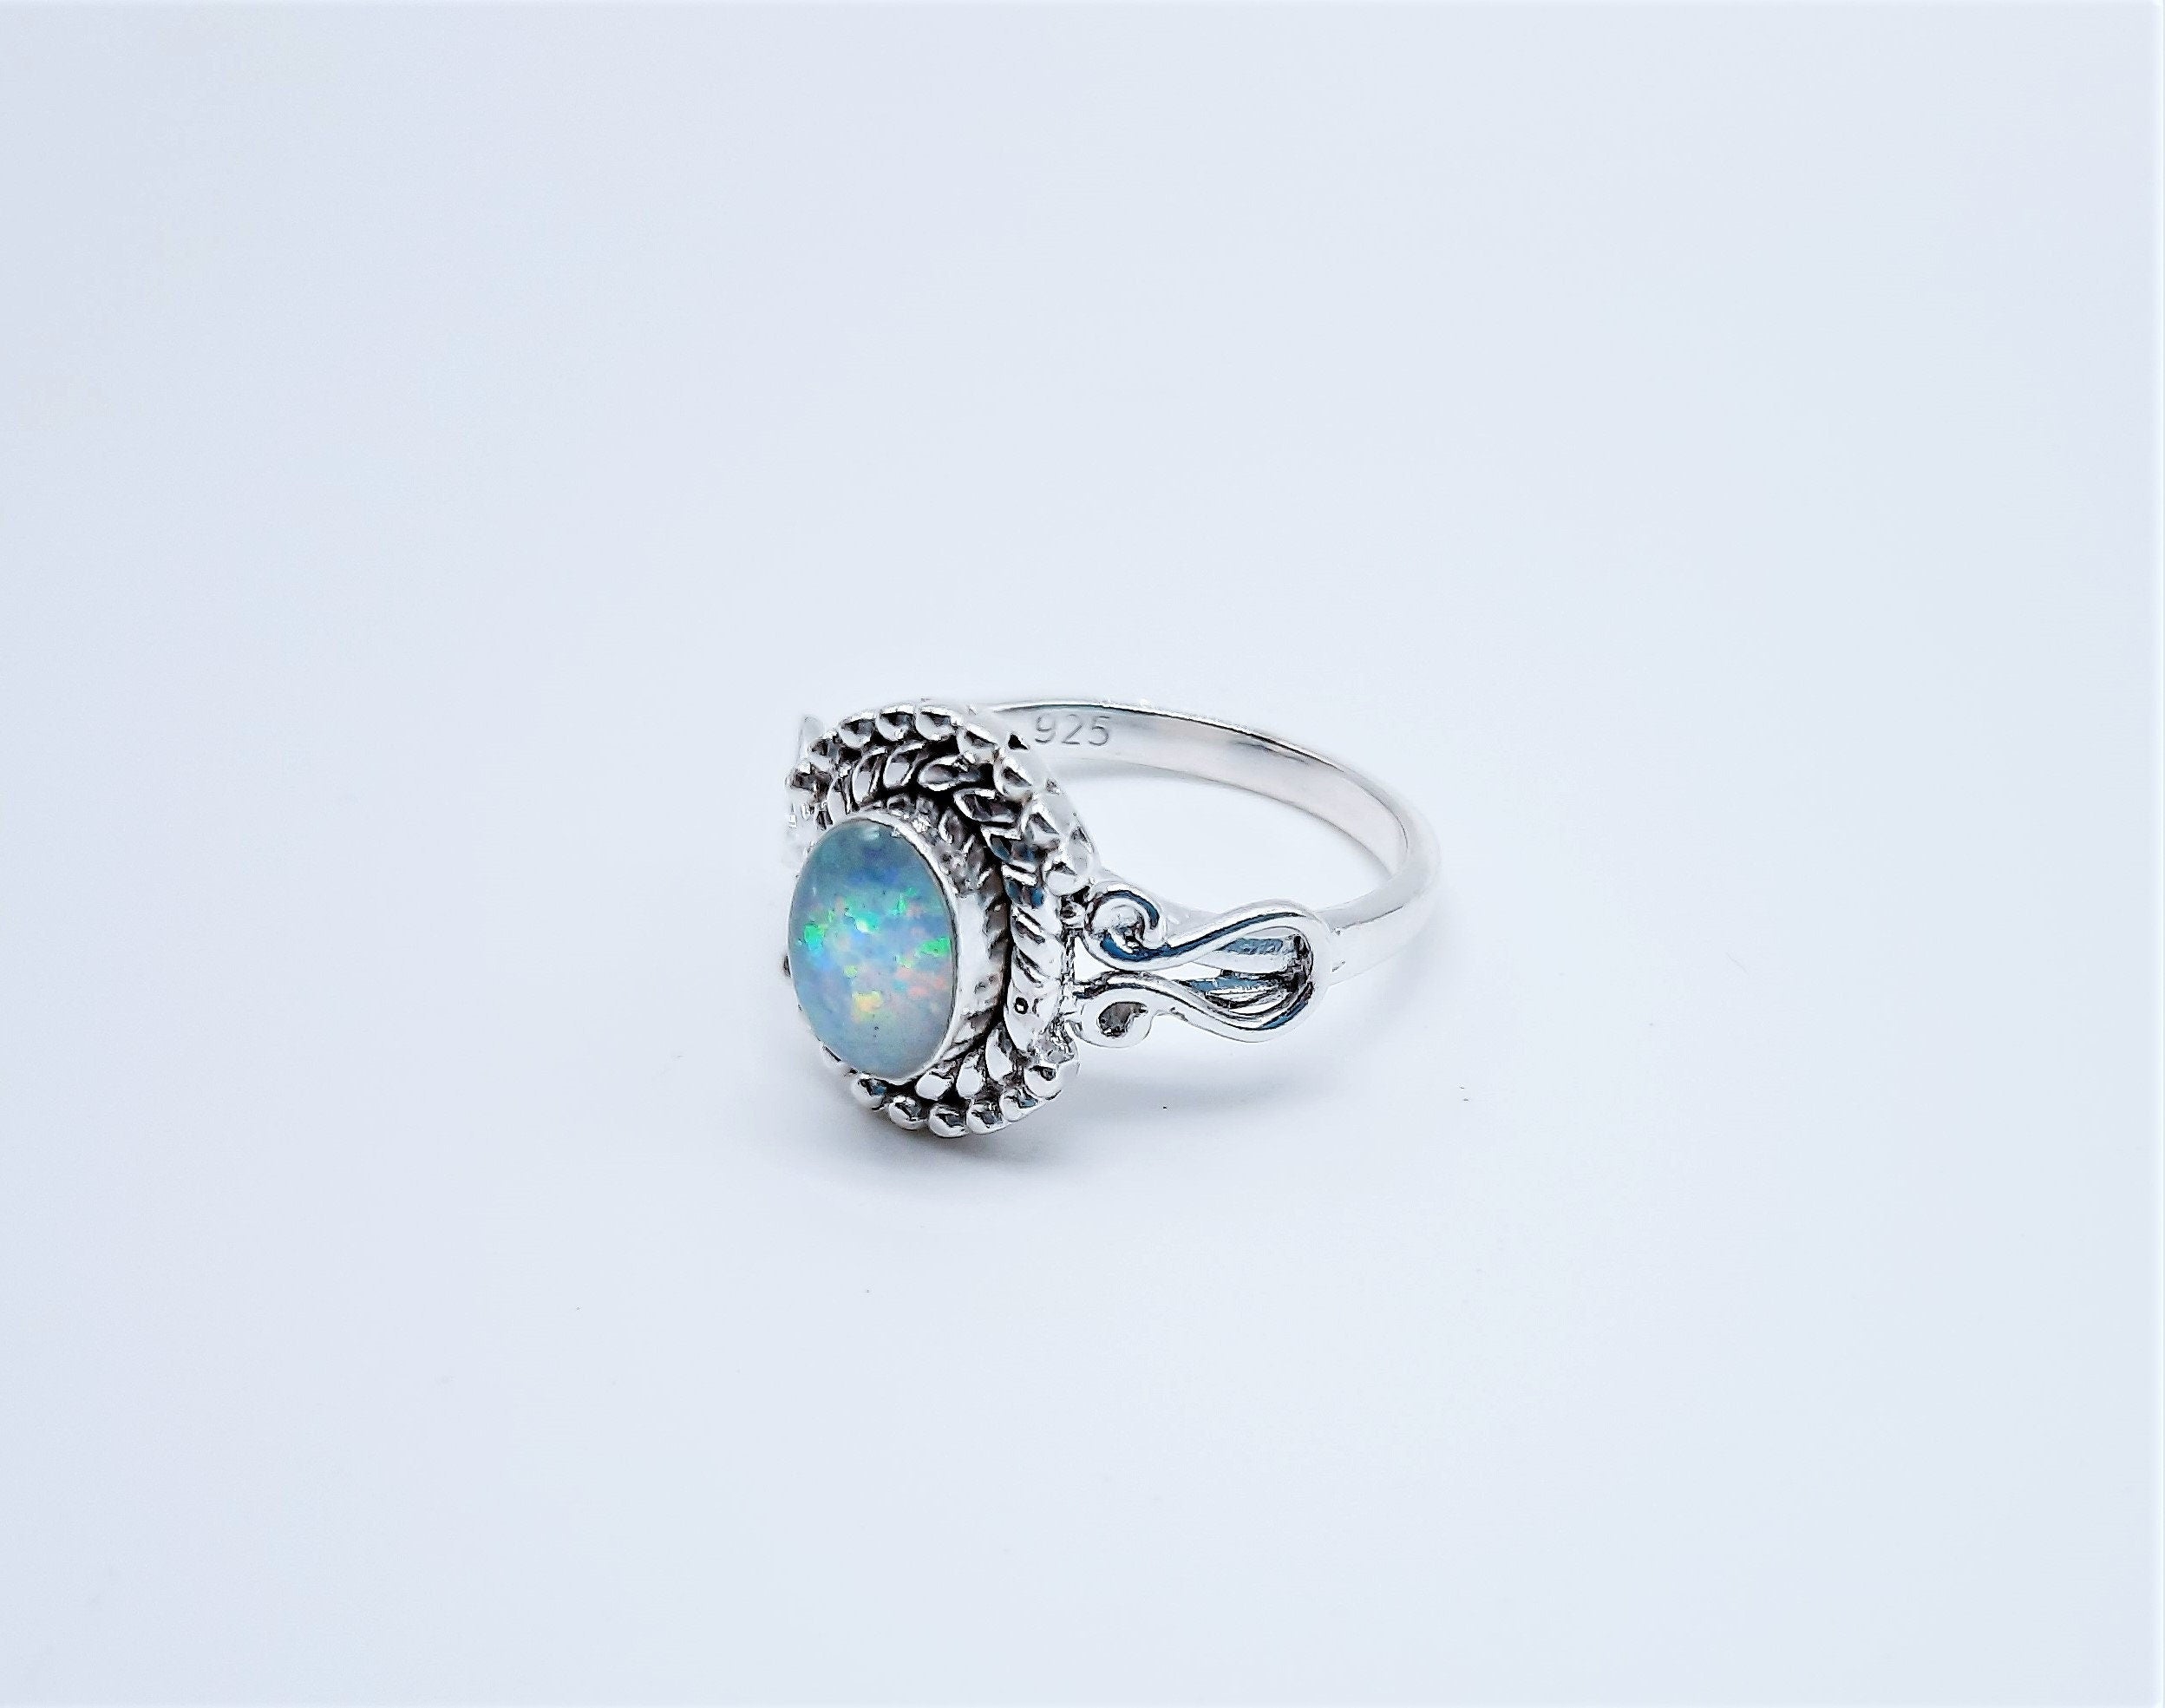 Silver White Opal Sterling Silver Solitaire Ring,Handmade Gemstone Jewelry,  Gift for Her4.5